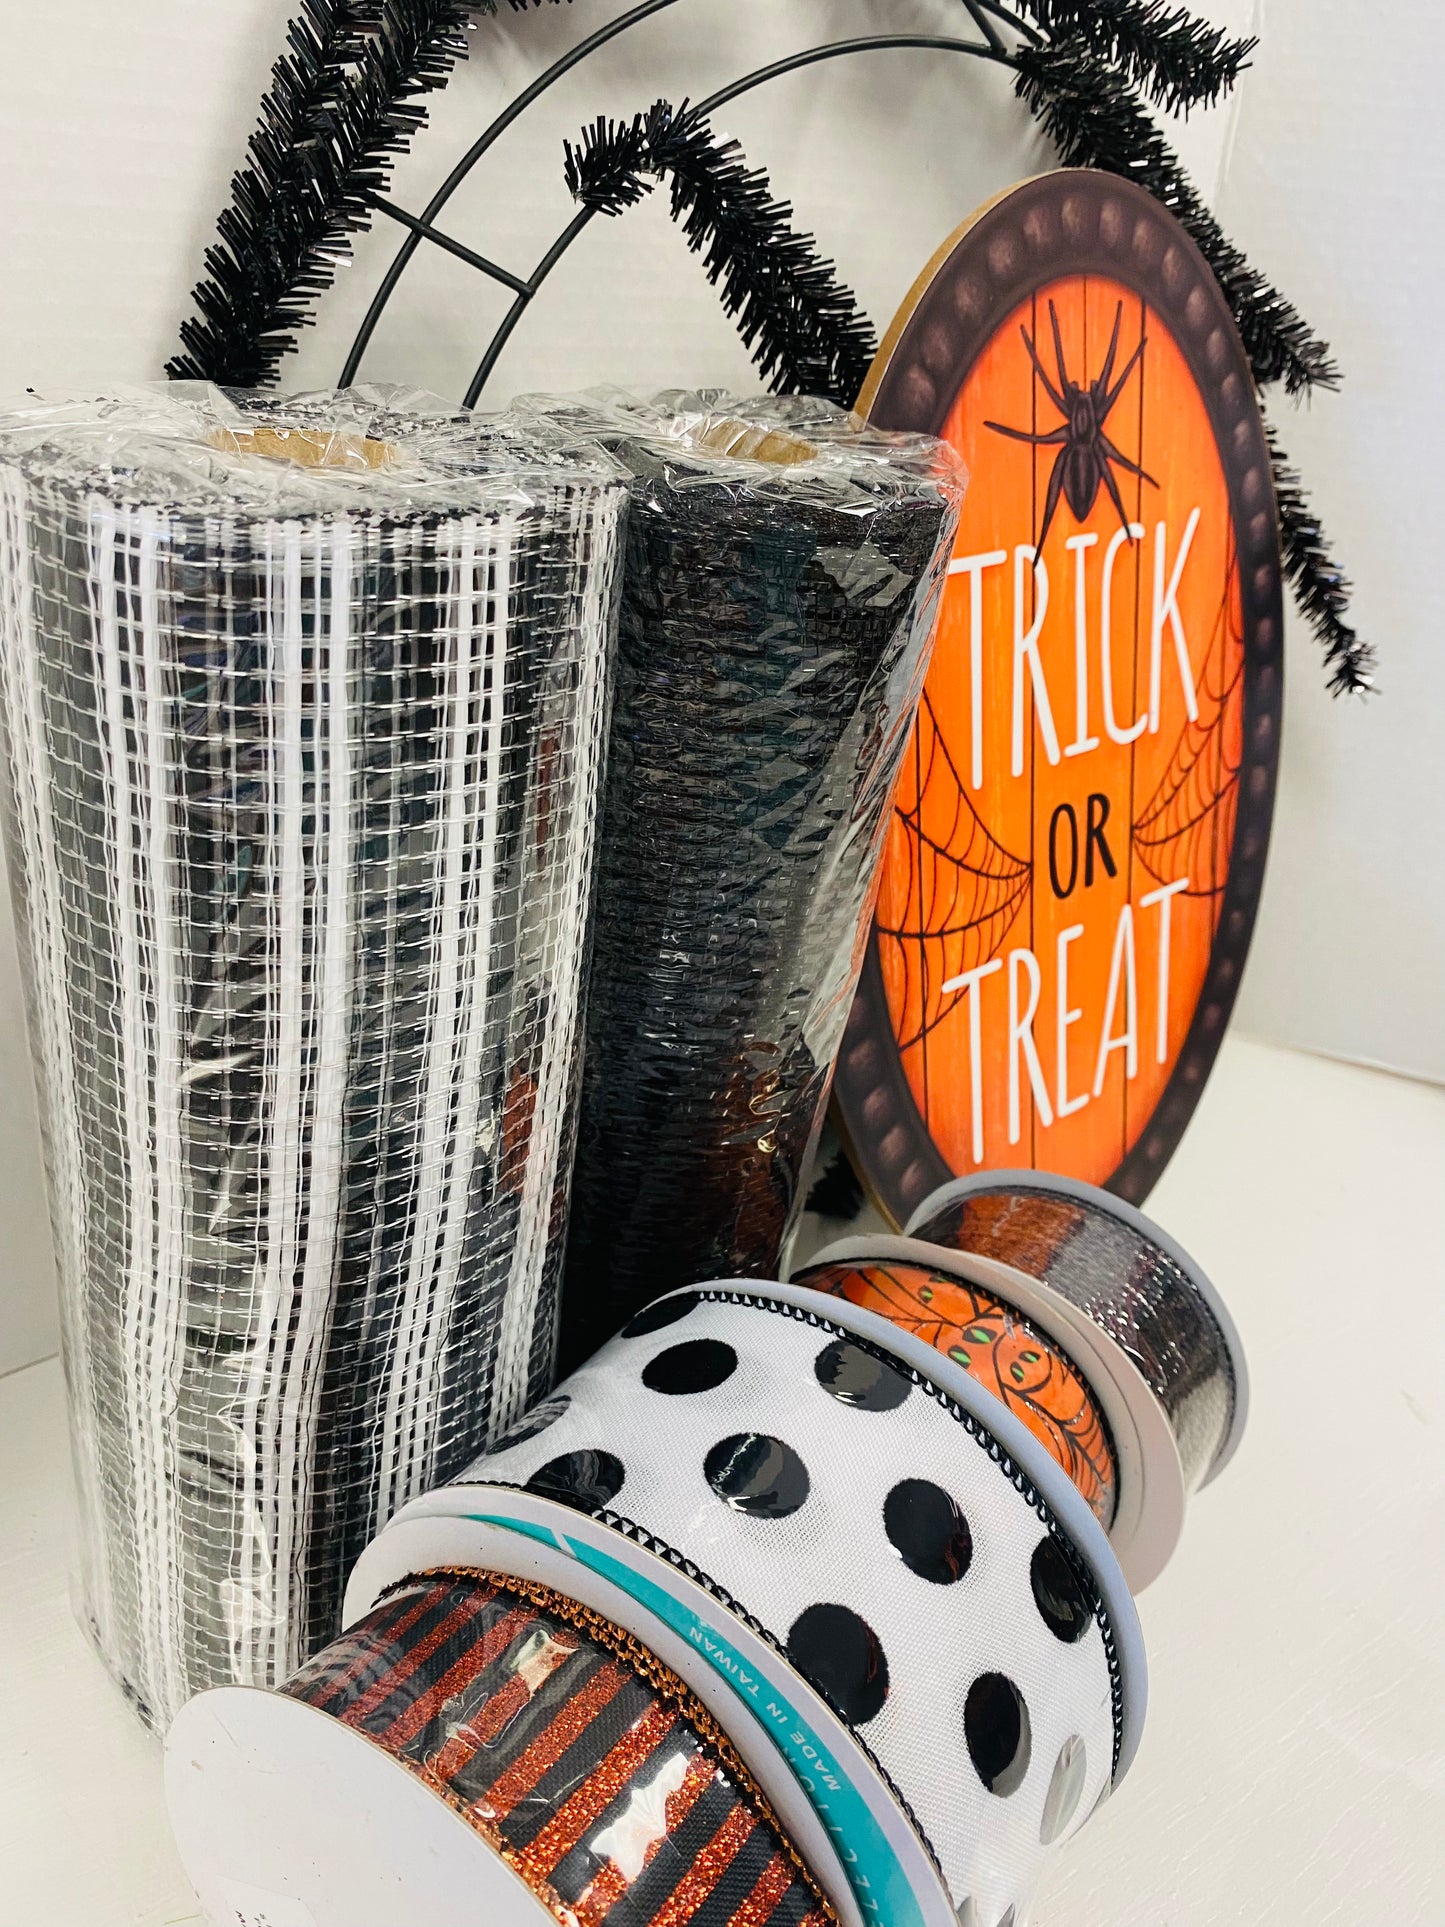 Party Kit - Trick or Treat